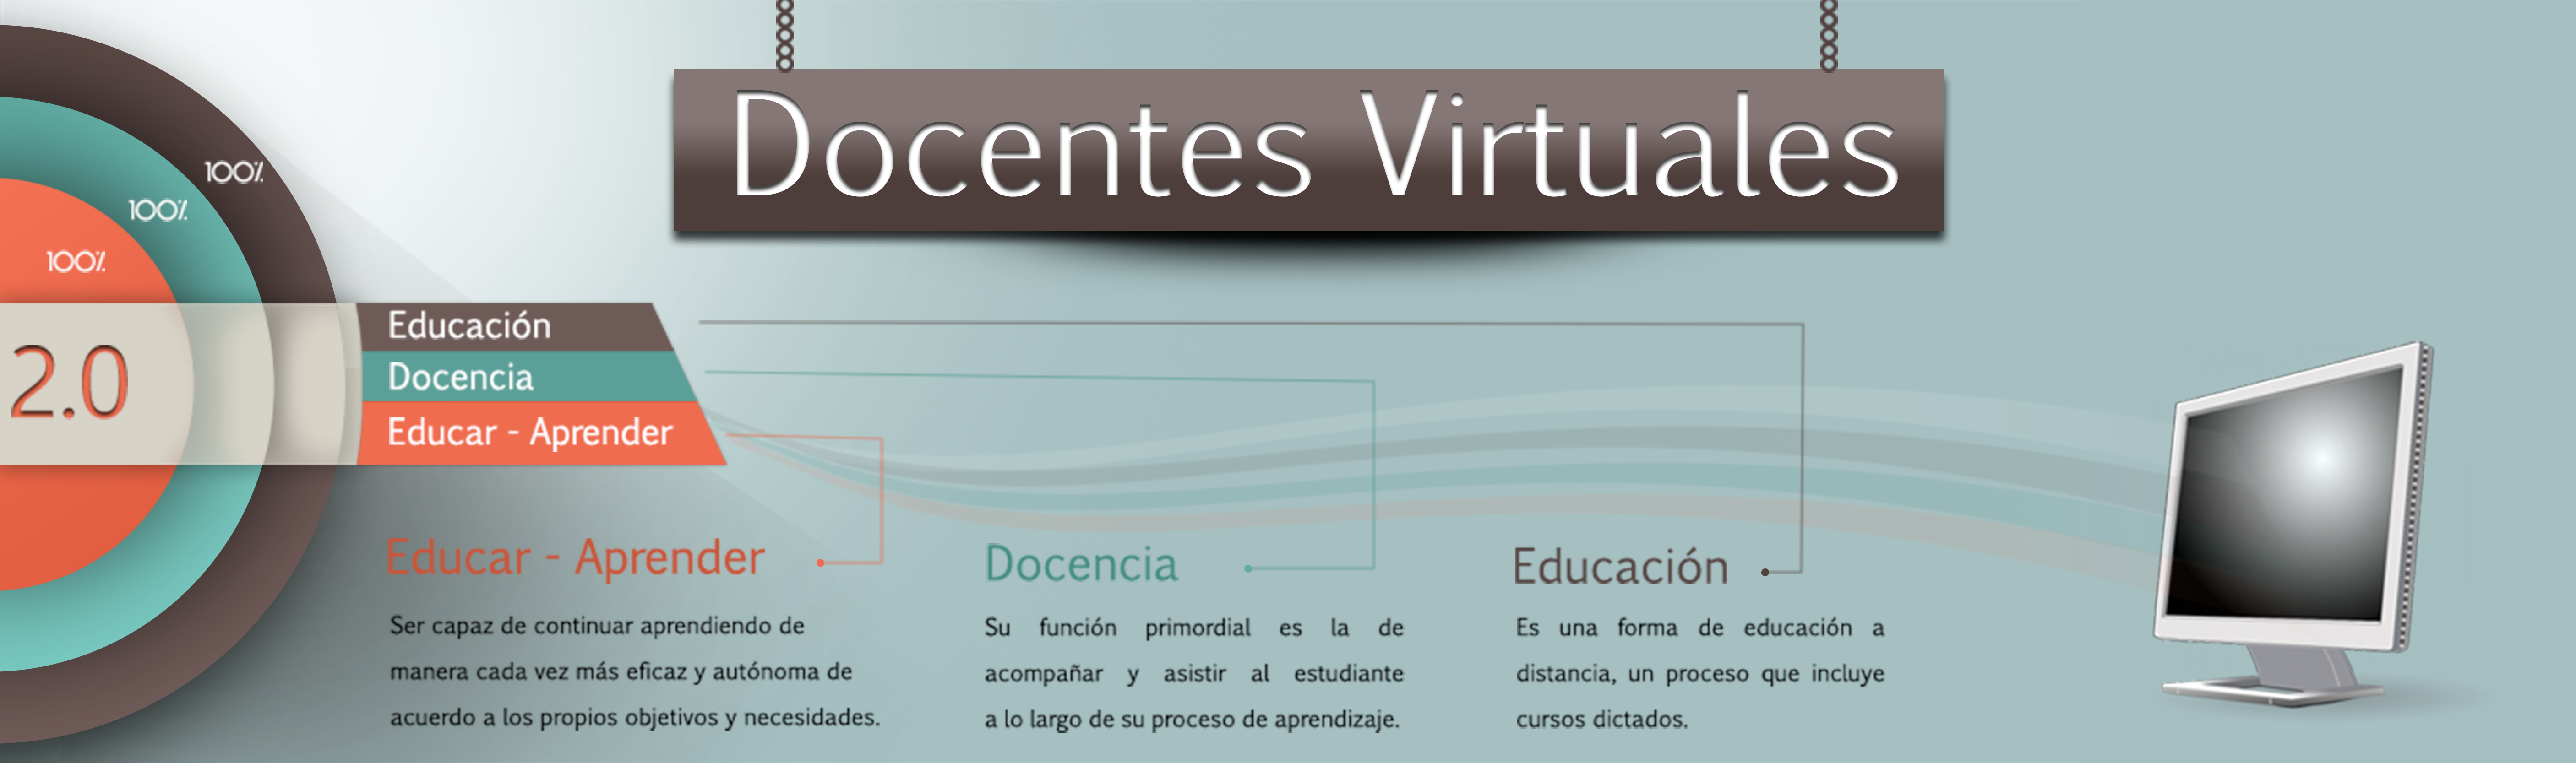 Docentes Virtuales